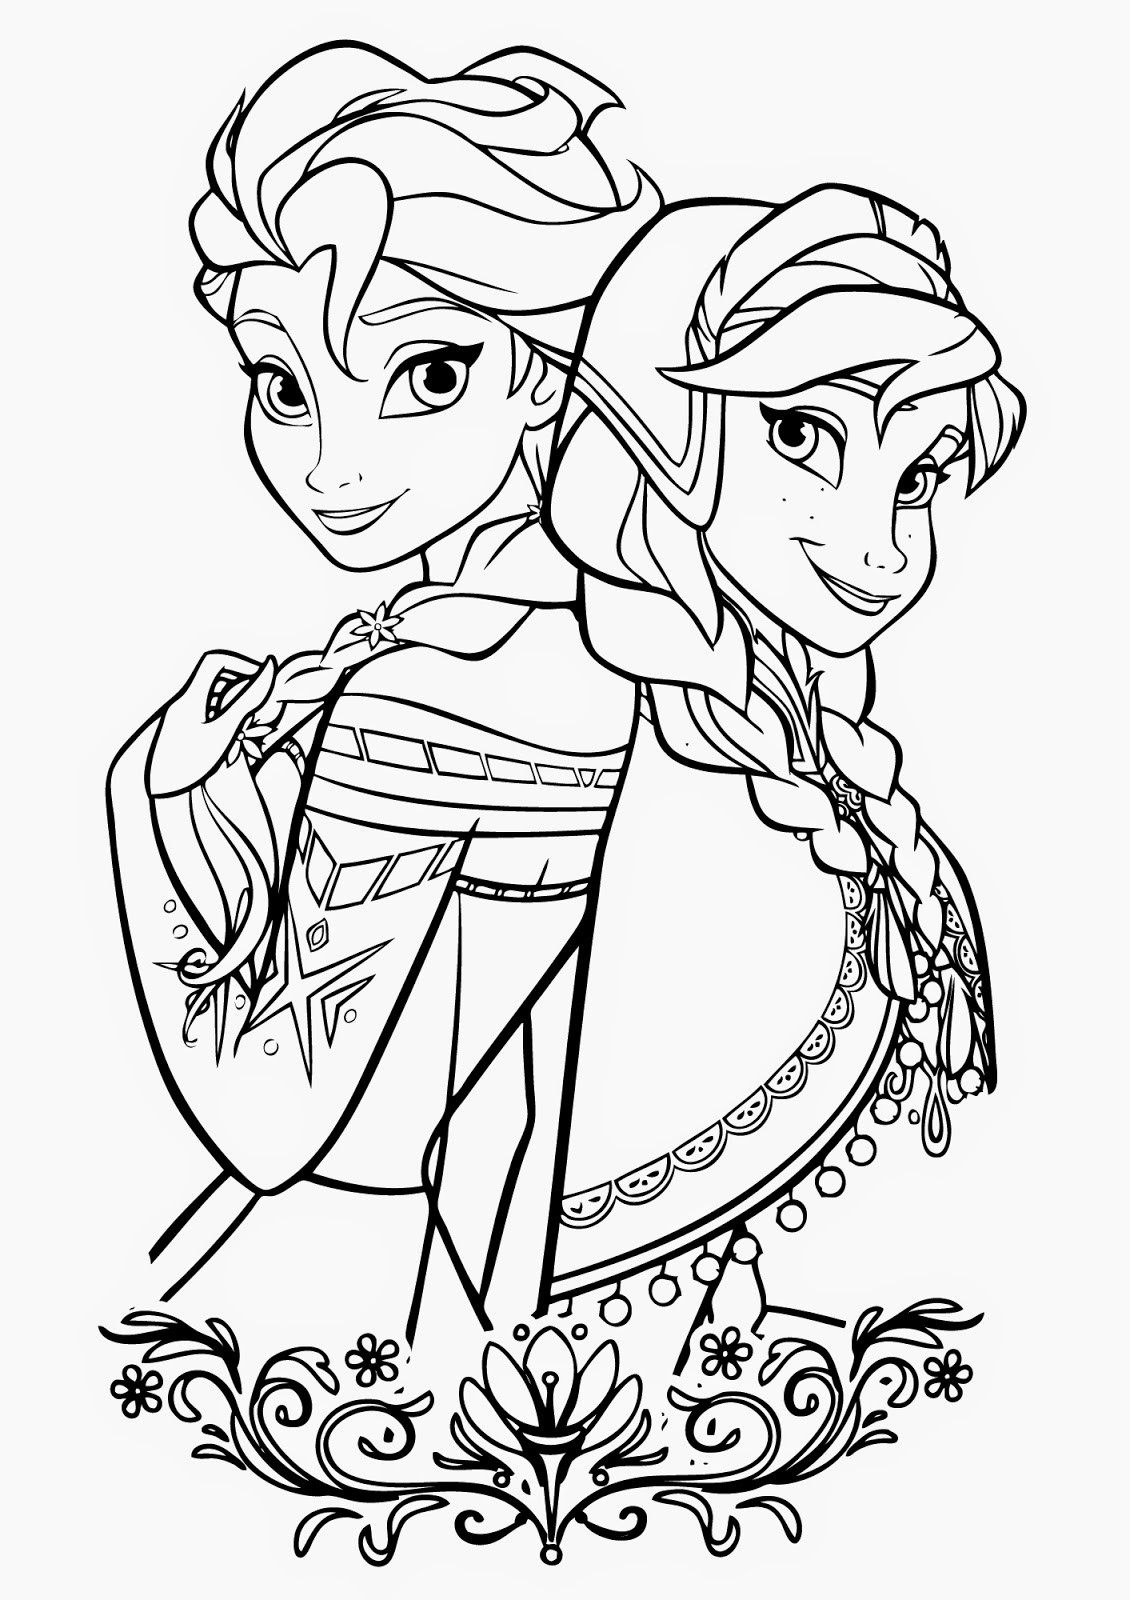 Printable Frozen Coloring Pages
 15 Beautiful Disney Frozen Coloring Pages Free Instant